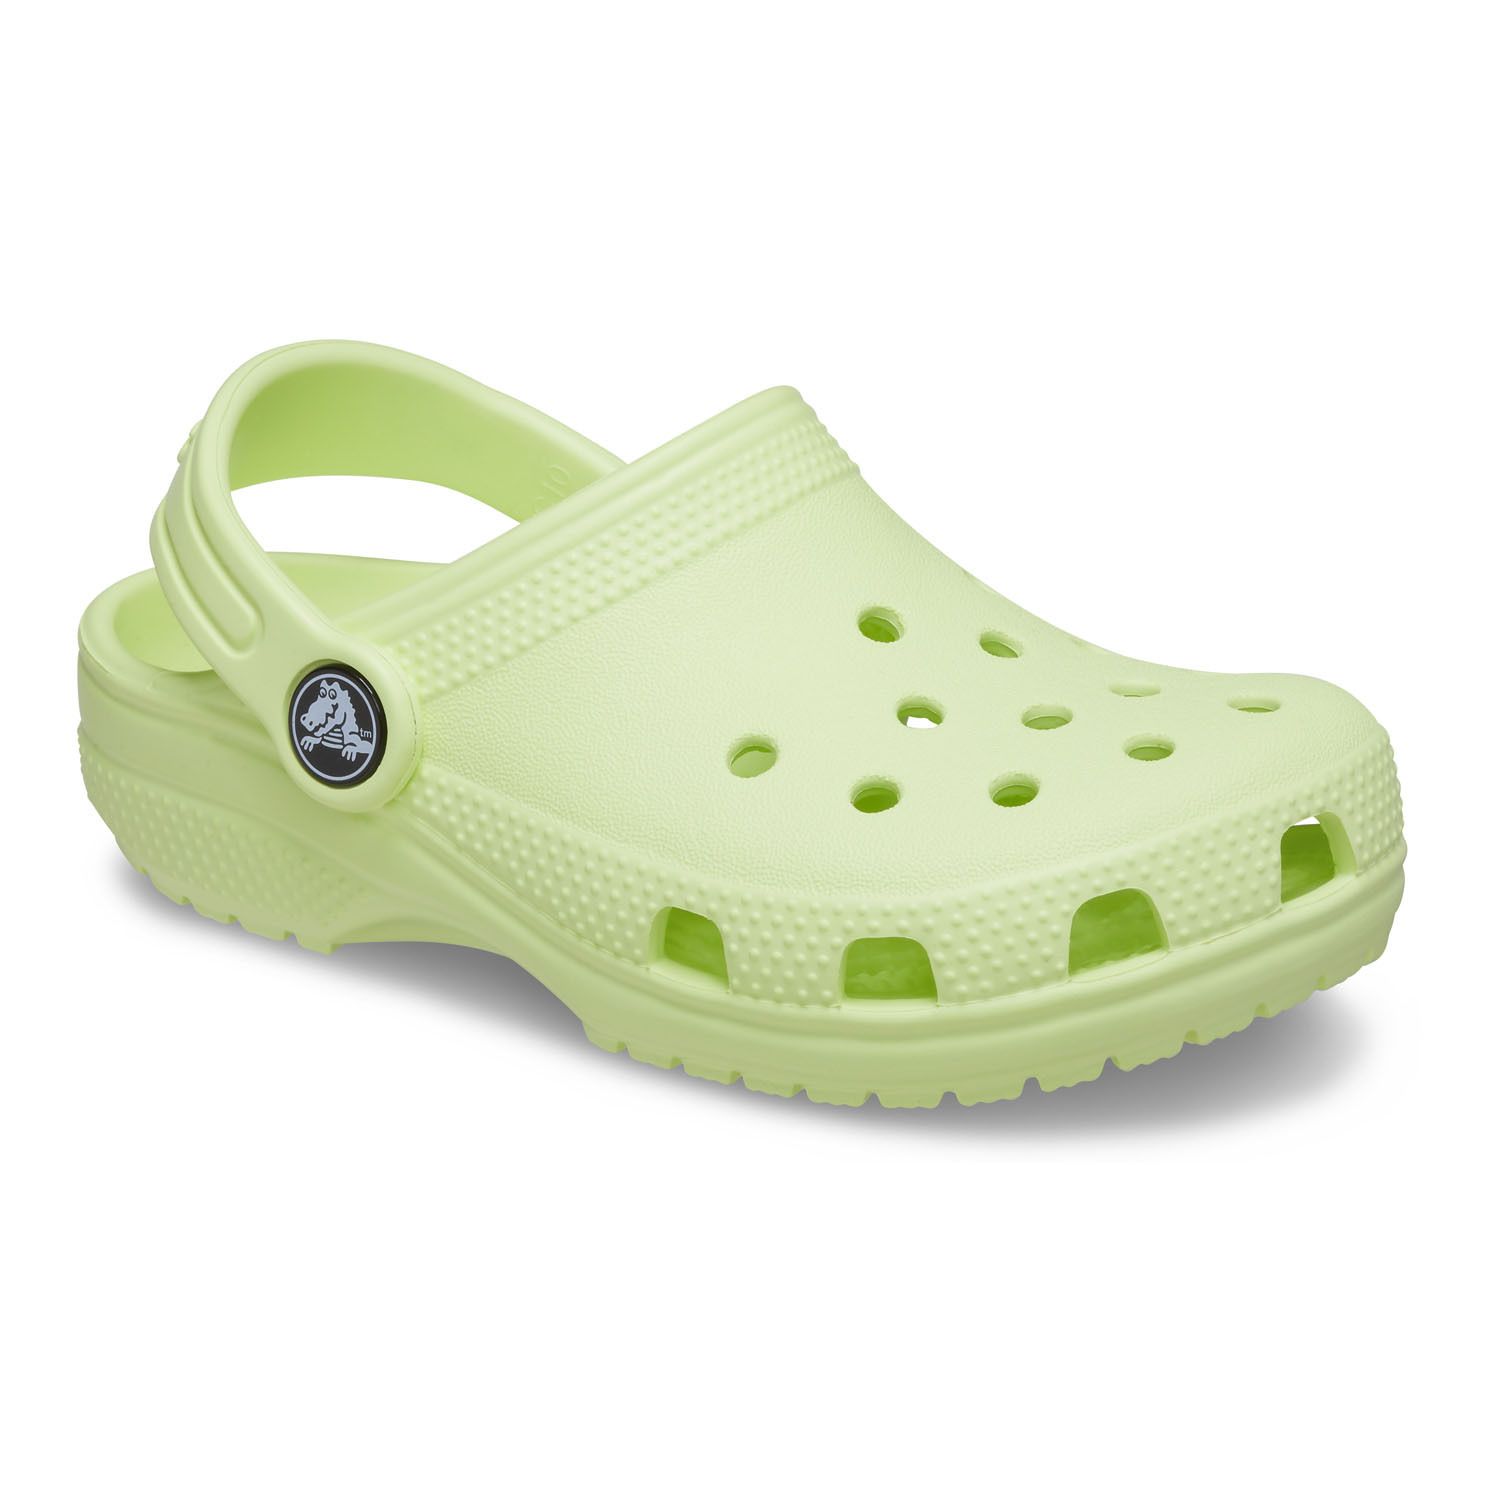 who sells croc shoes near me